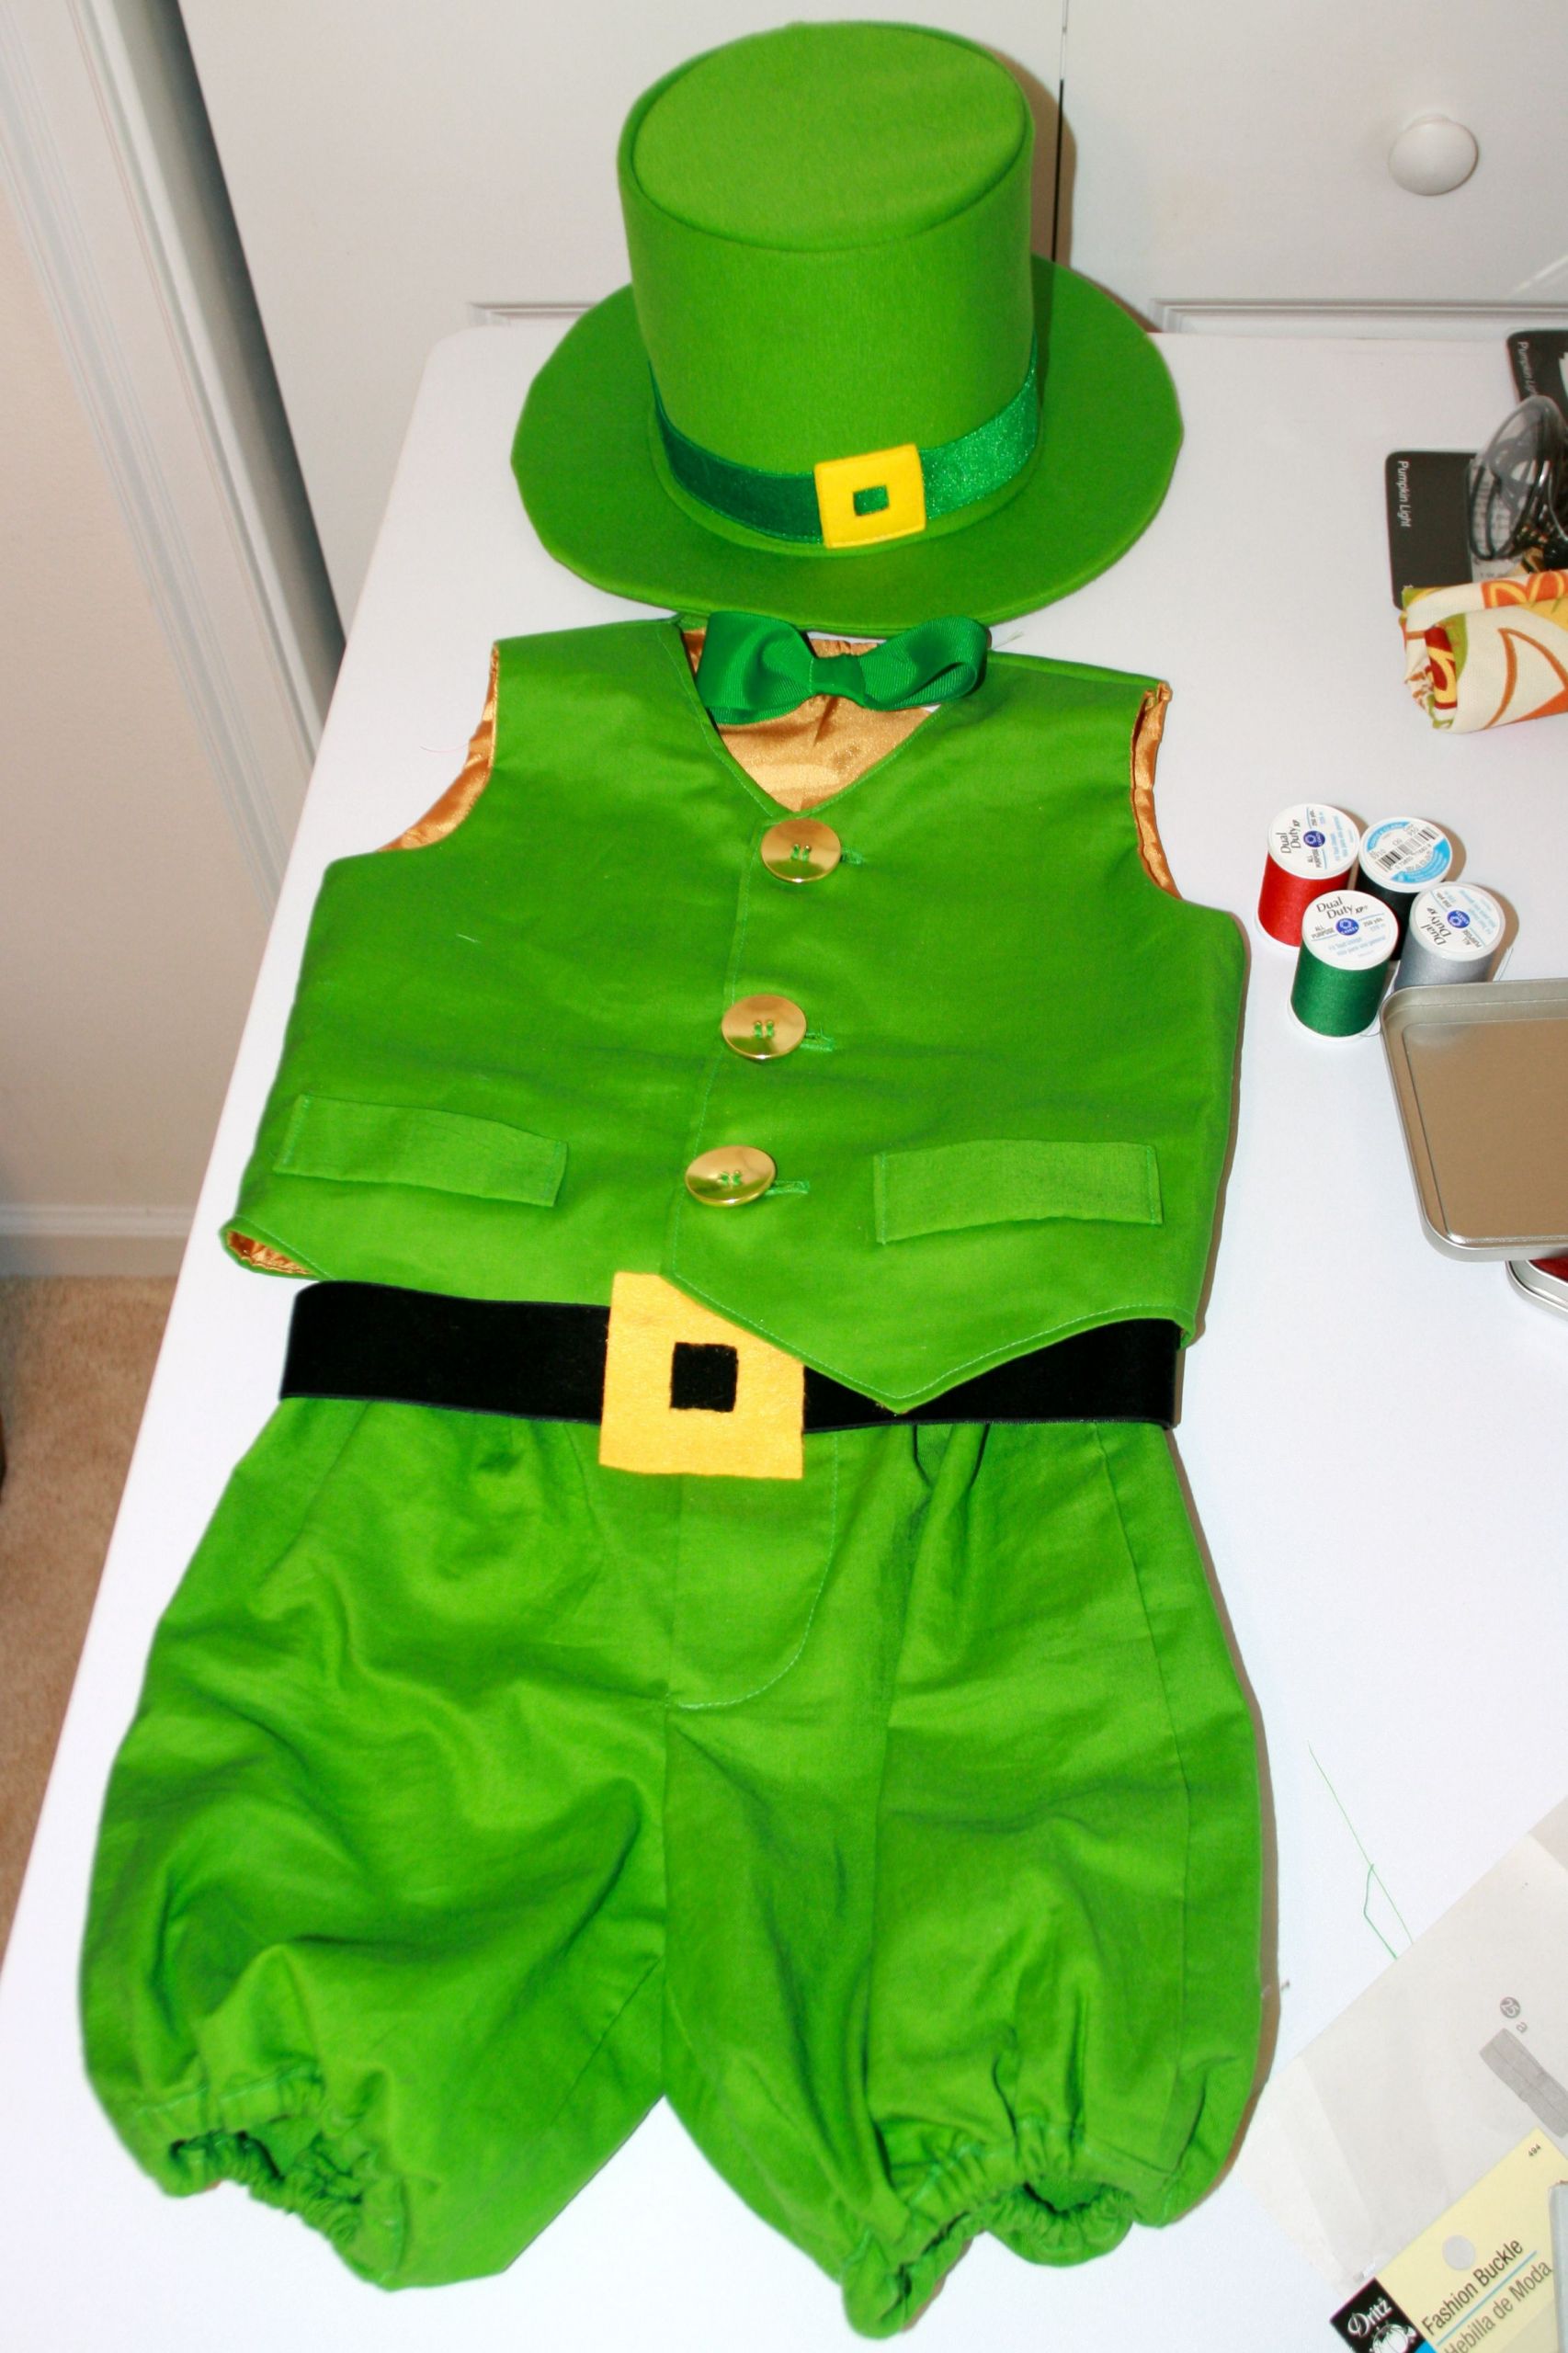 Saint Patrick's Day Outfit Ideas
 Leprechaun Costume might be able to find a hat for St